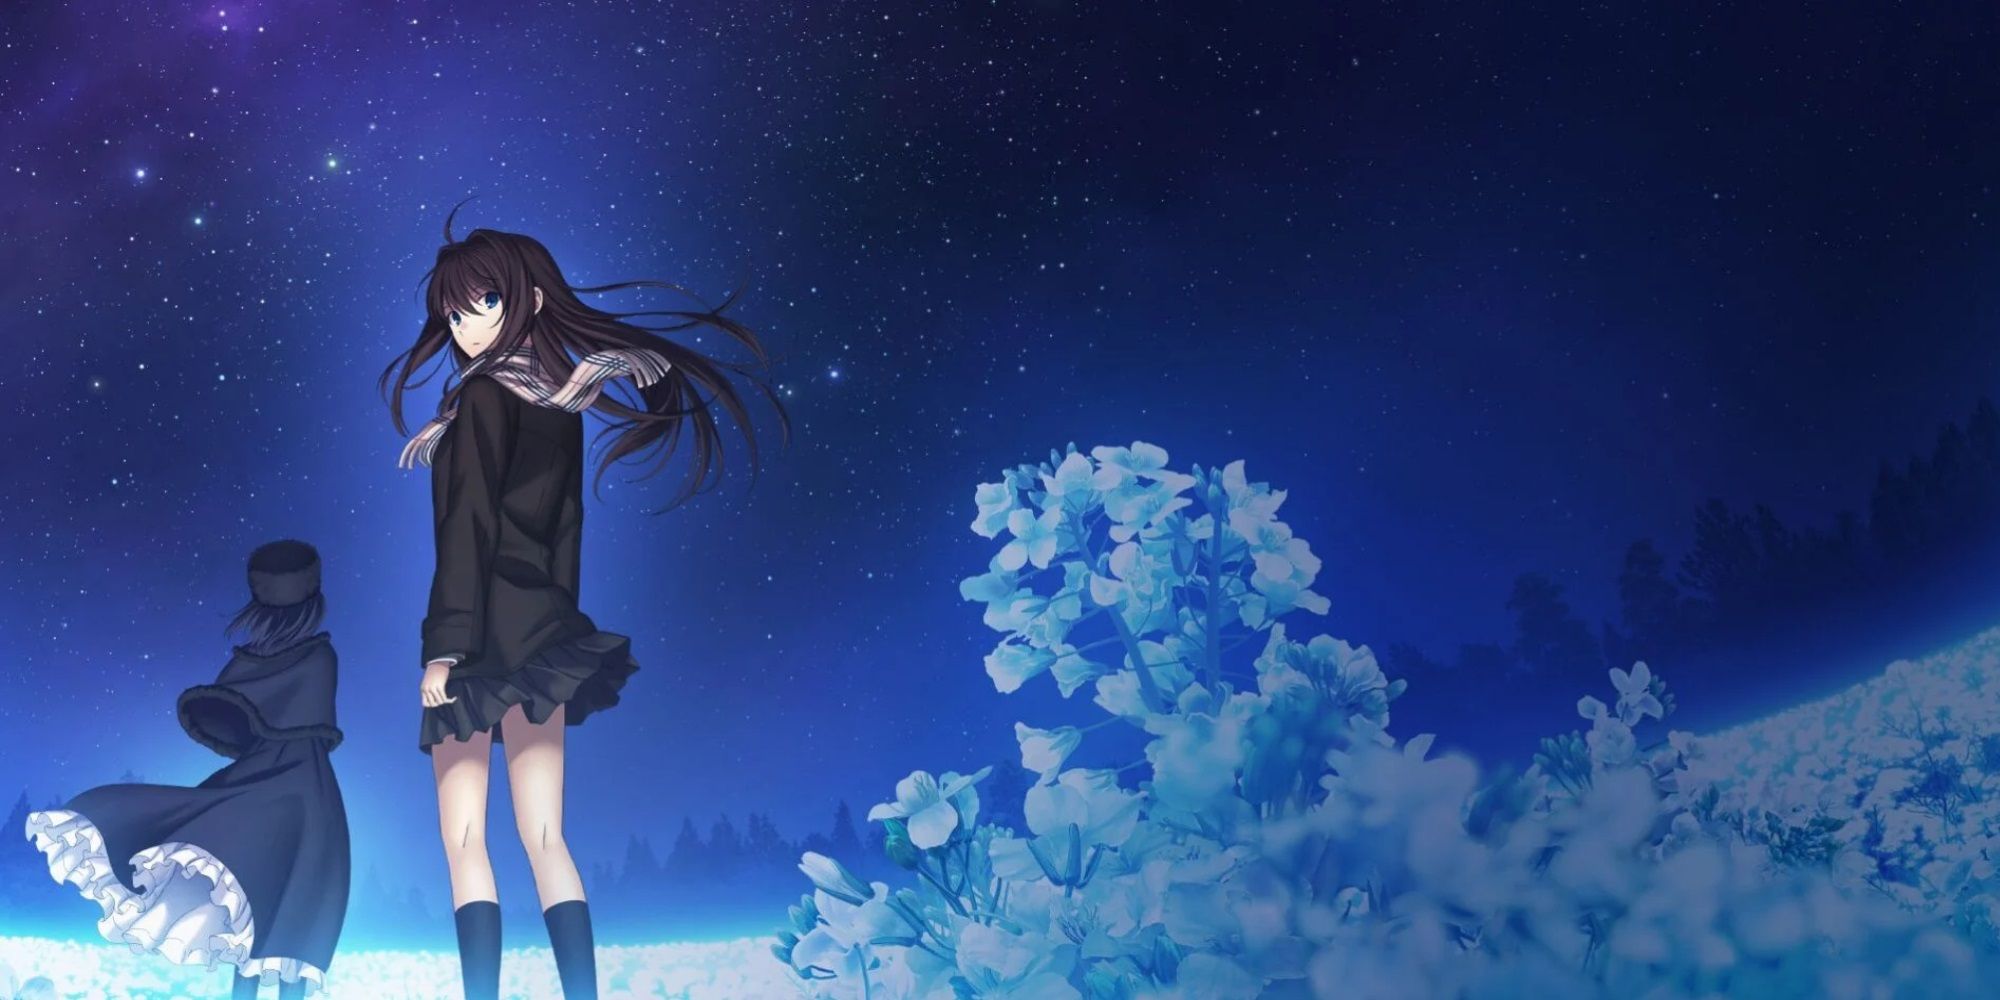 Mahoyo - A beautiful screen of Aoko and Alice standing under a colorful night sky.